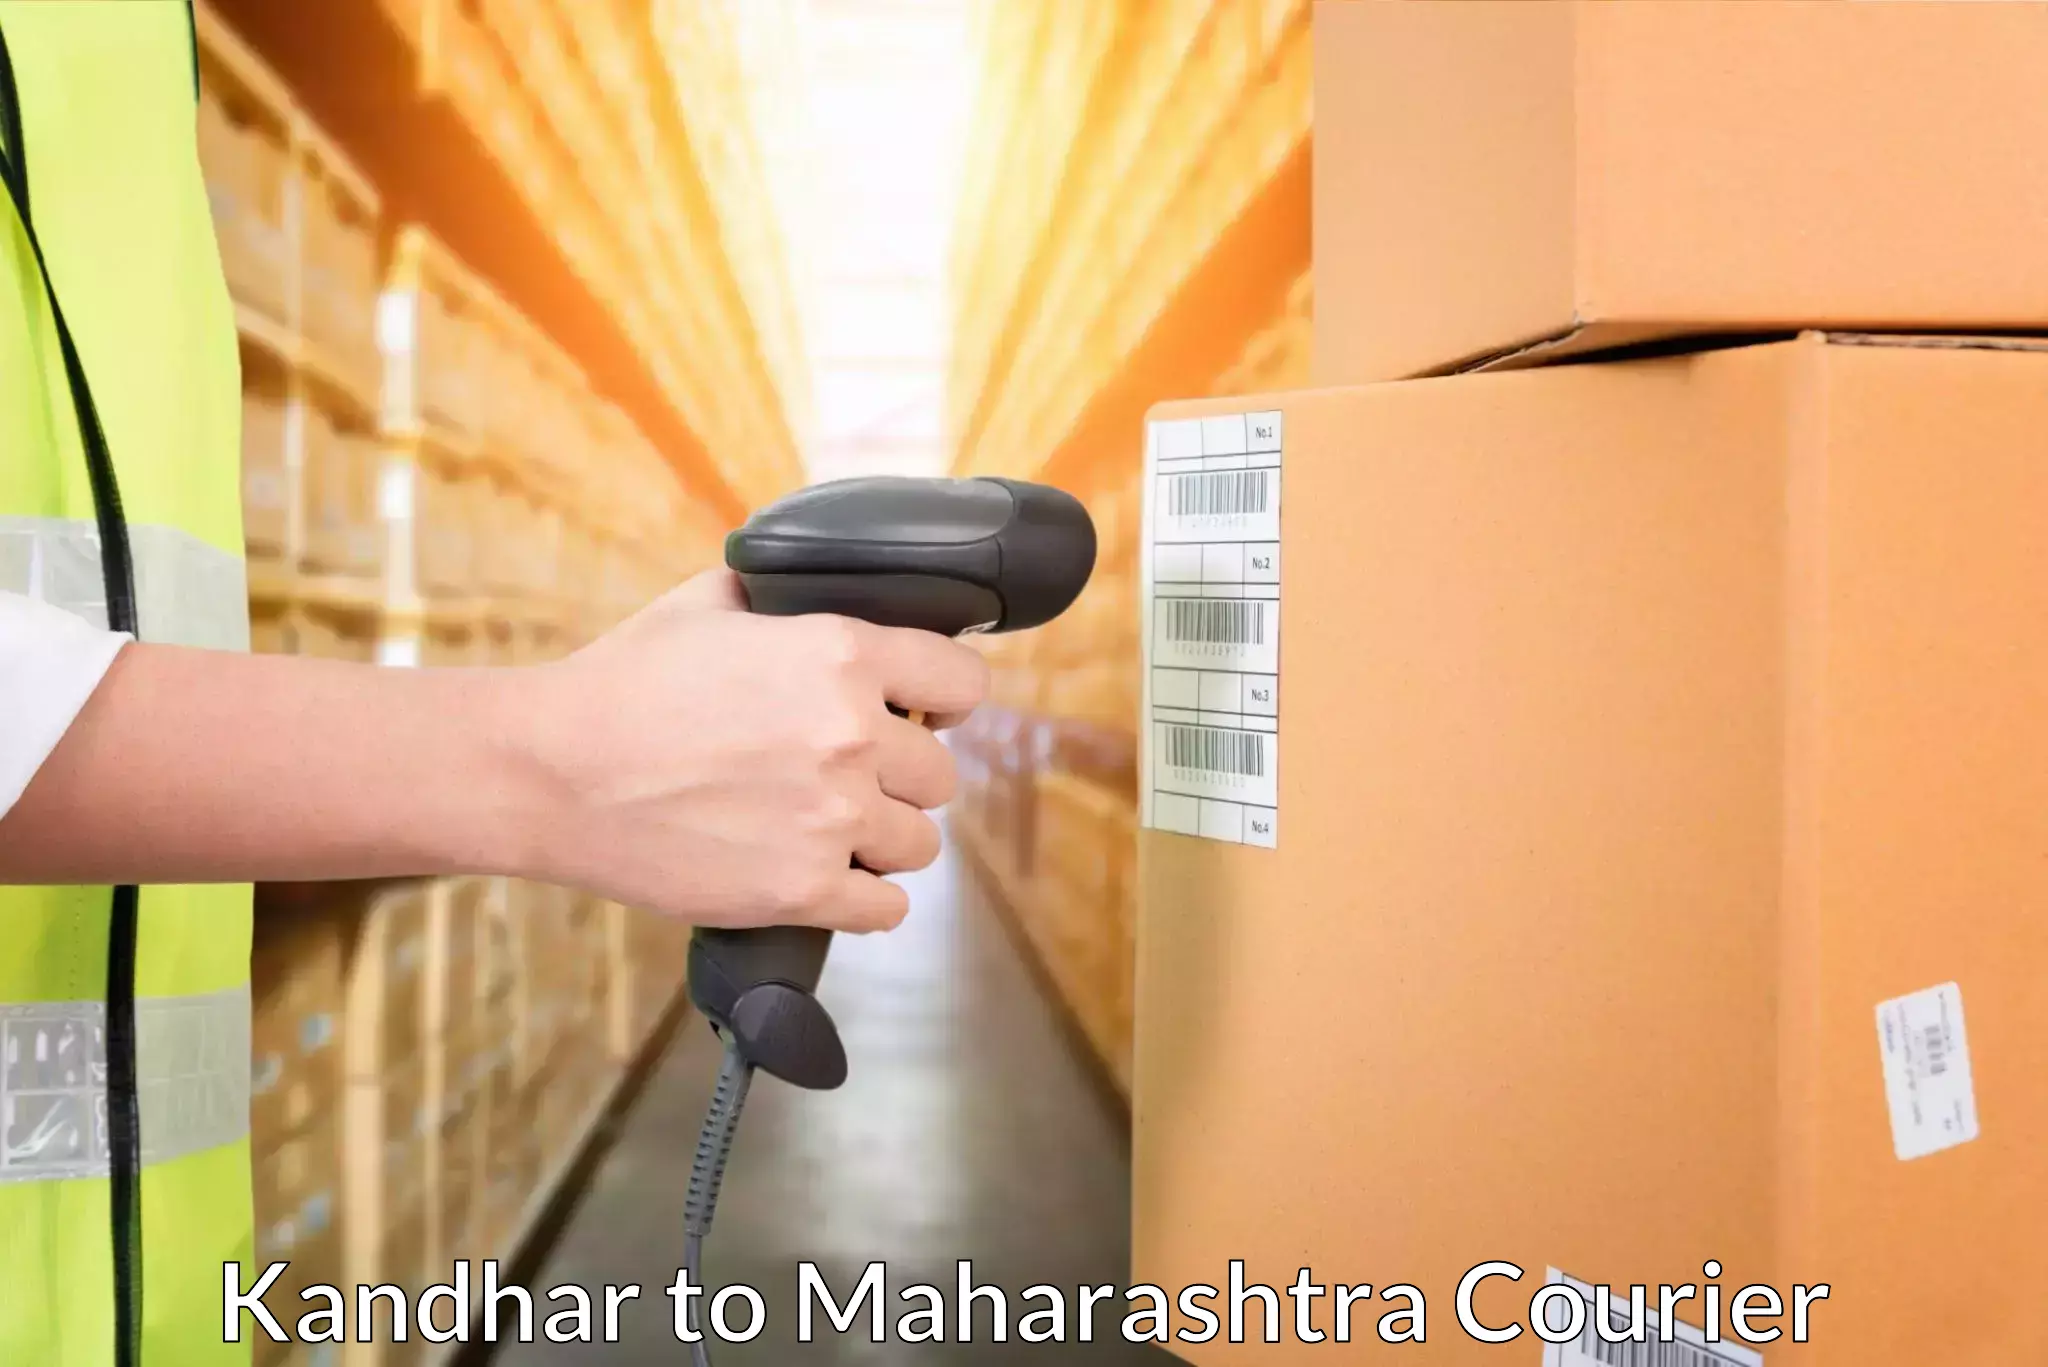 Courier service innovation Kandhar to Pune